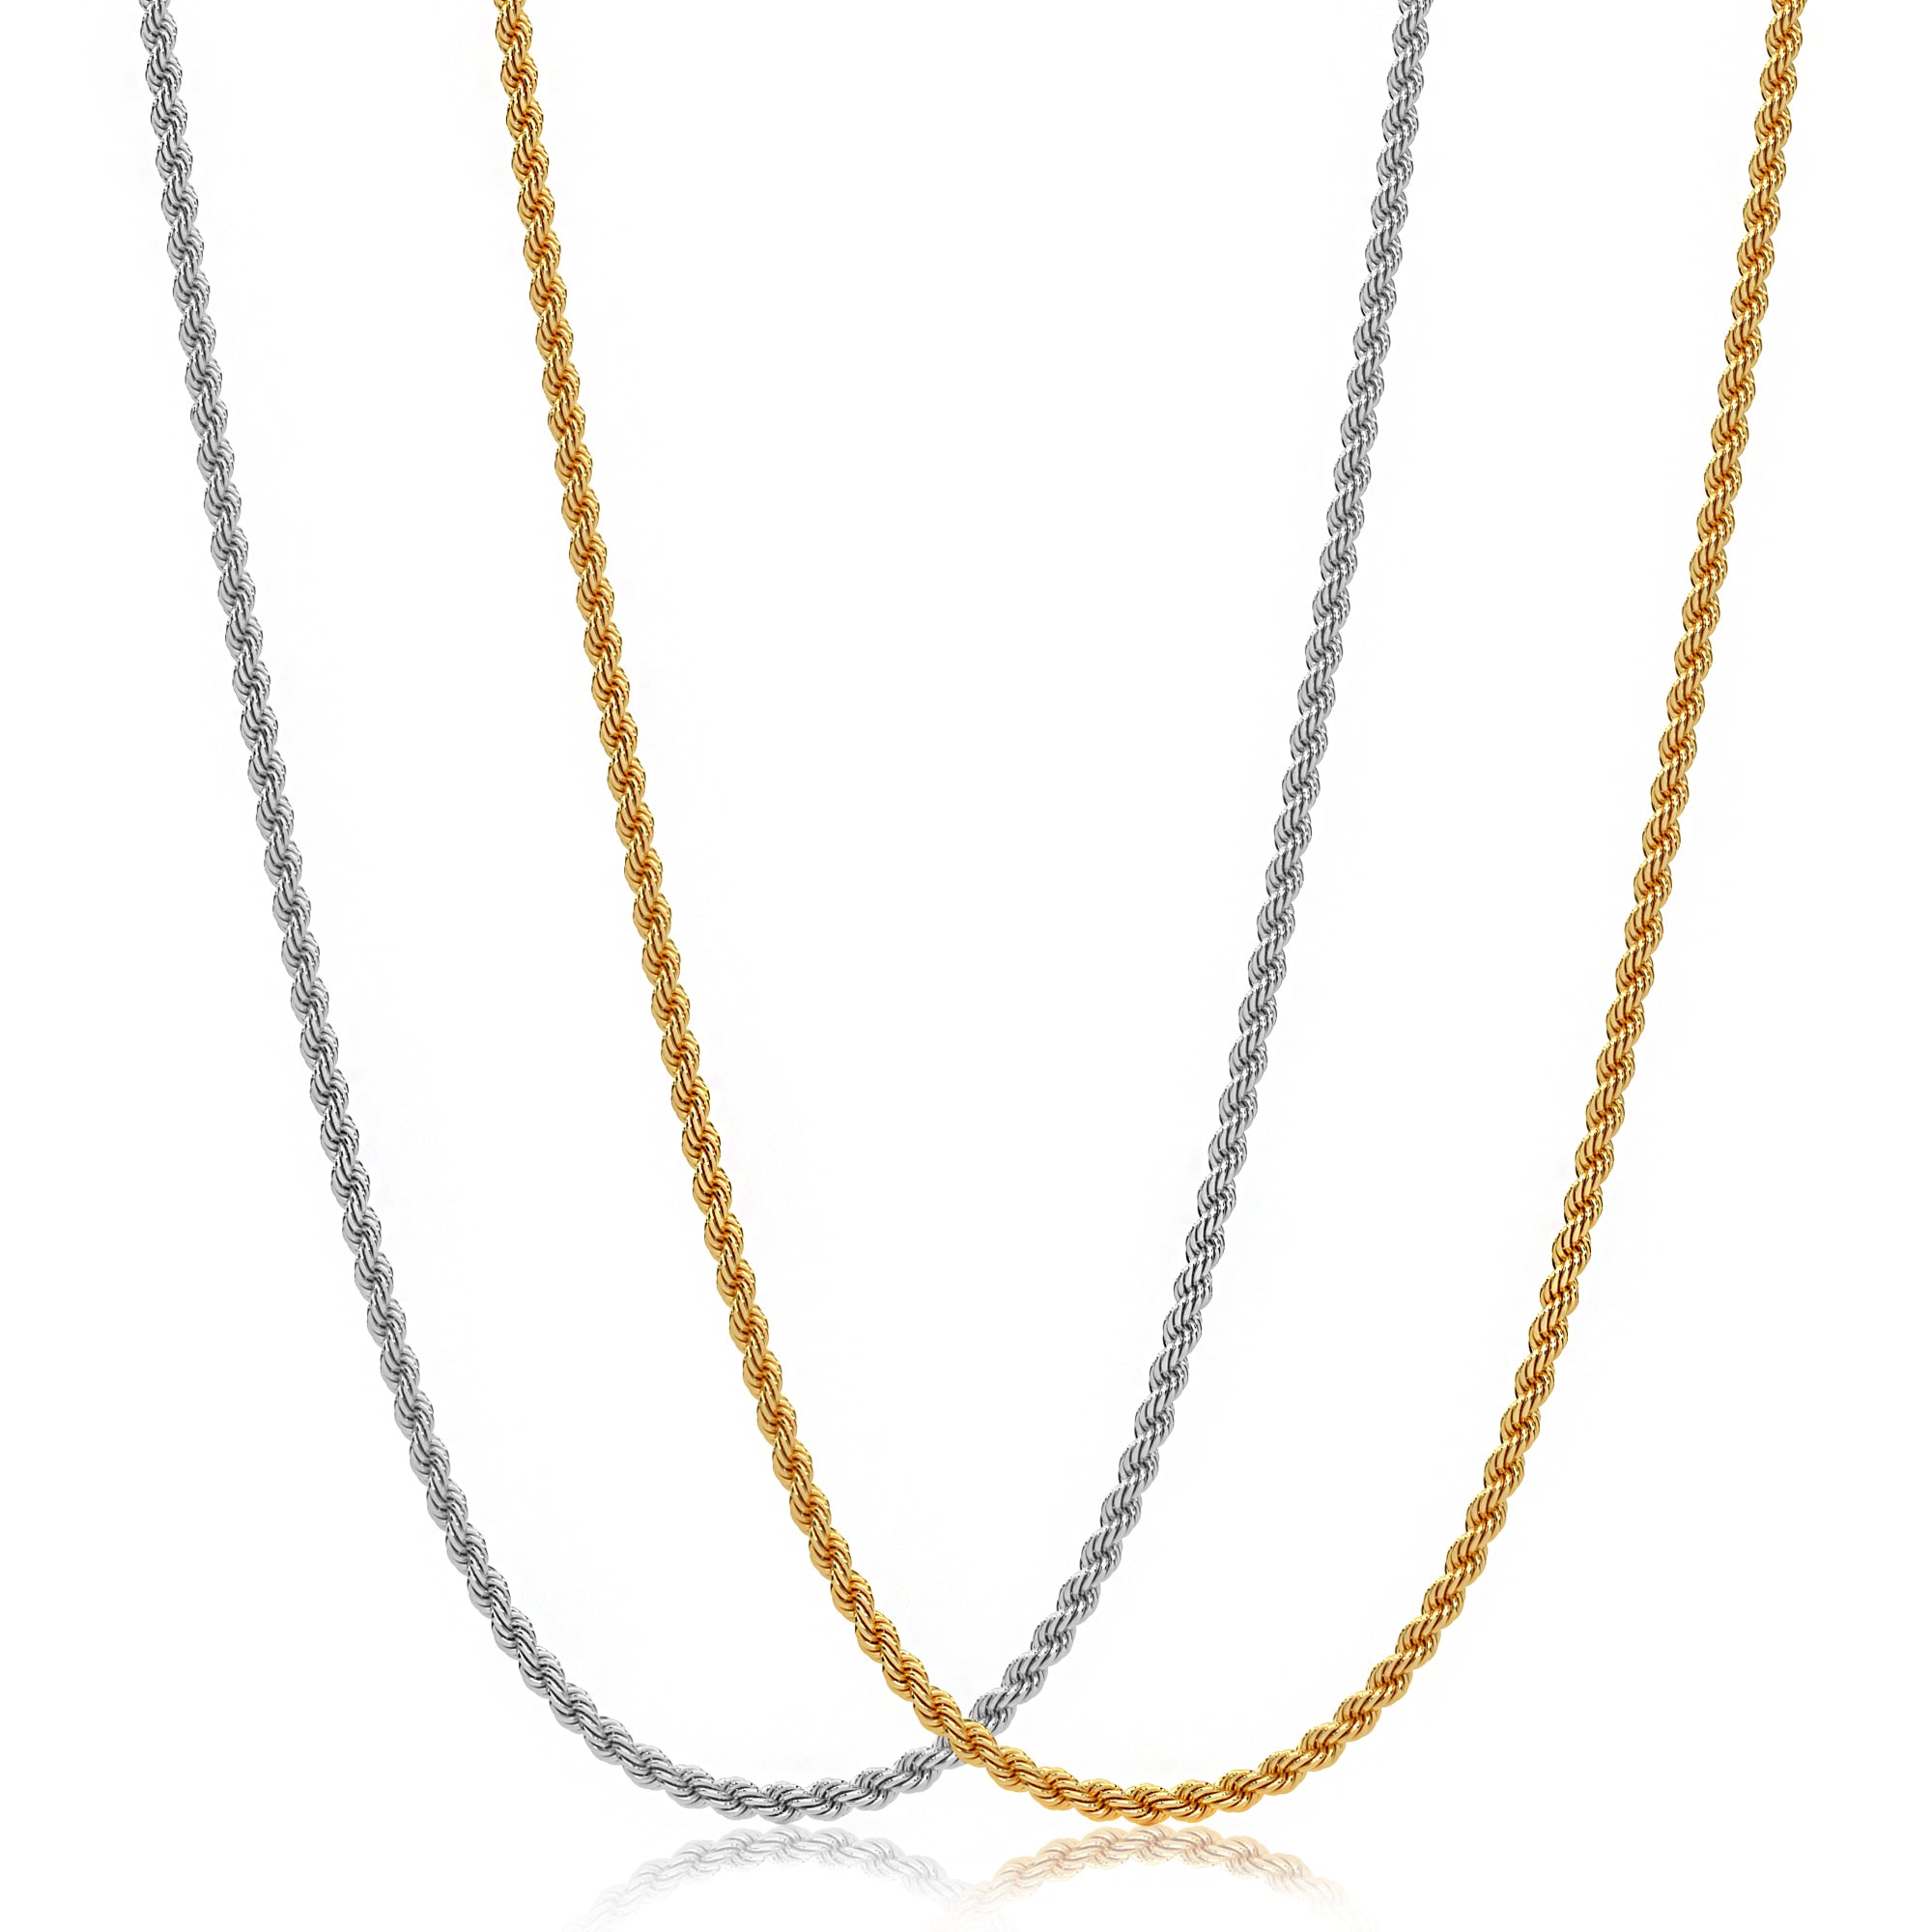 Rope Chain Ketting | Compleet RVS 60cm | Zilver